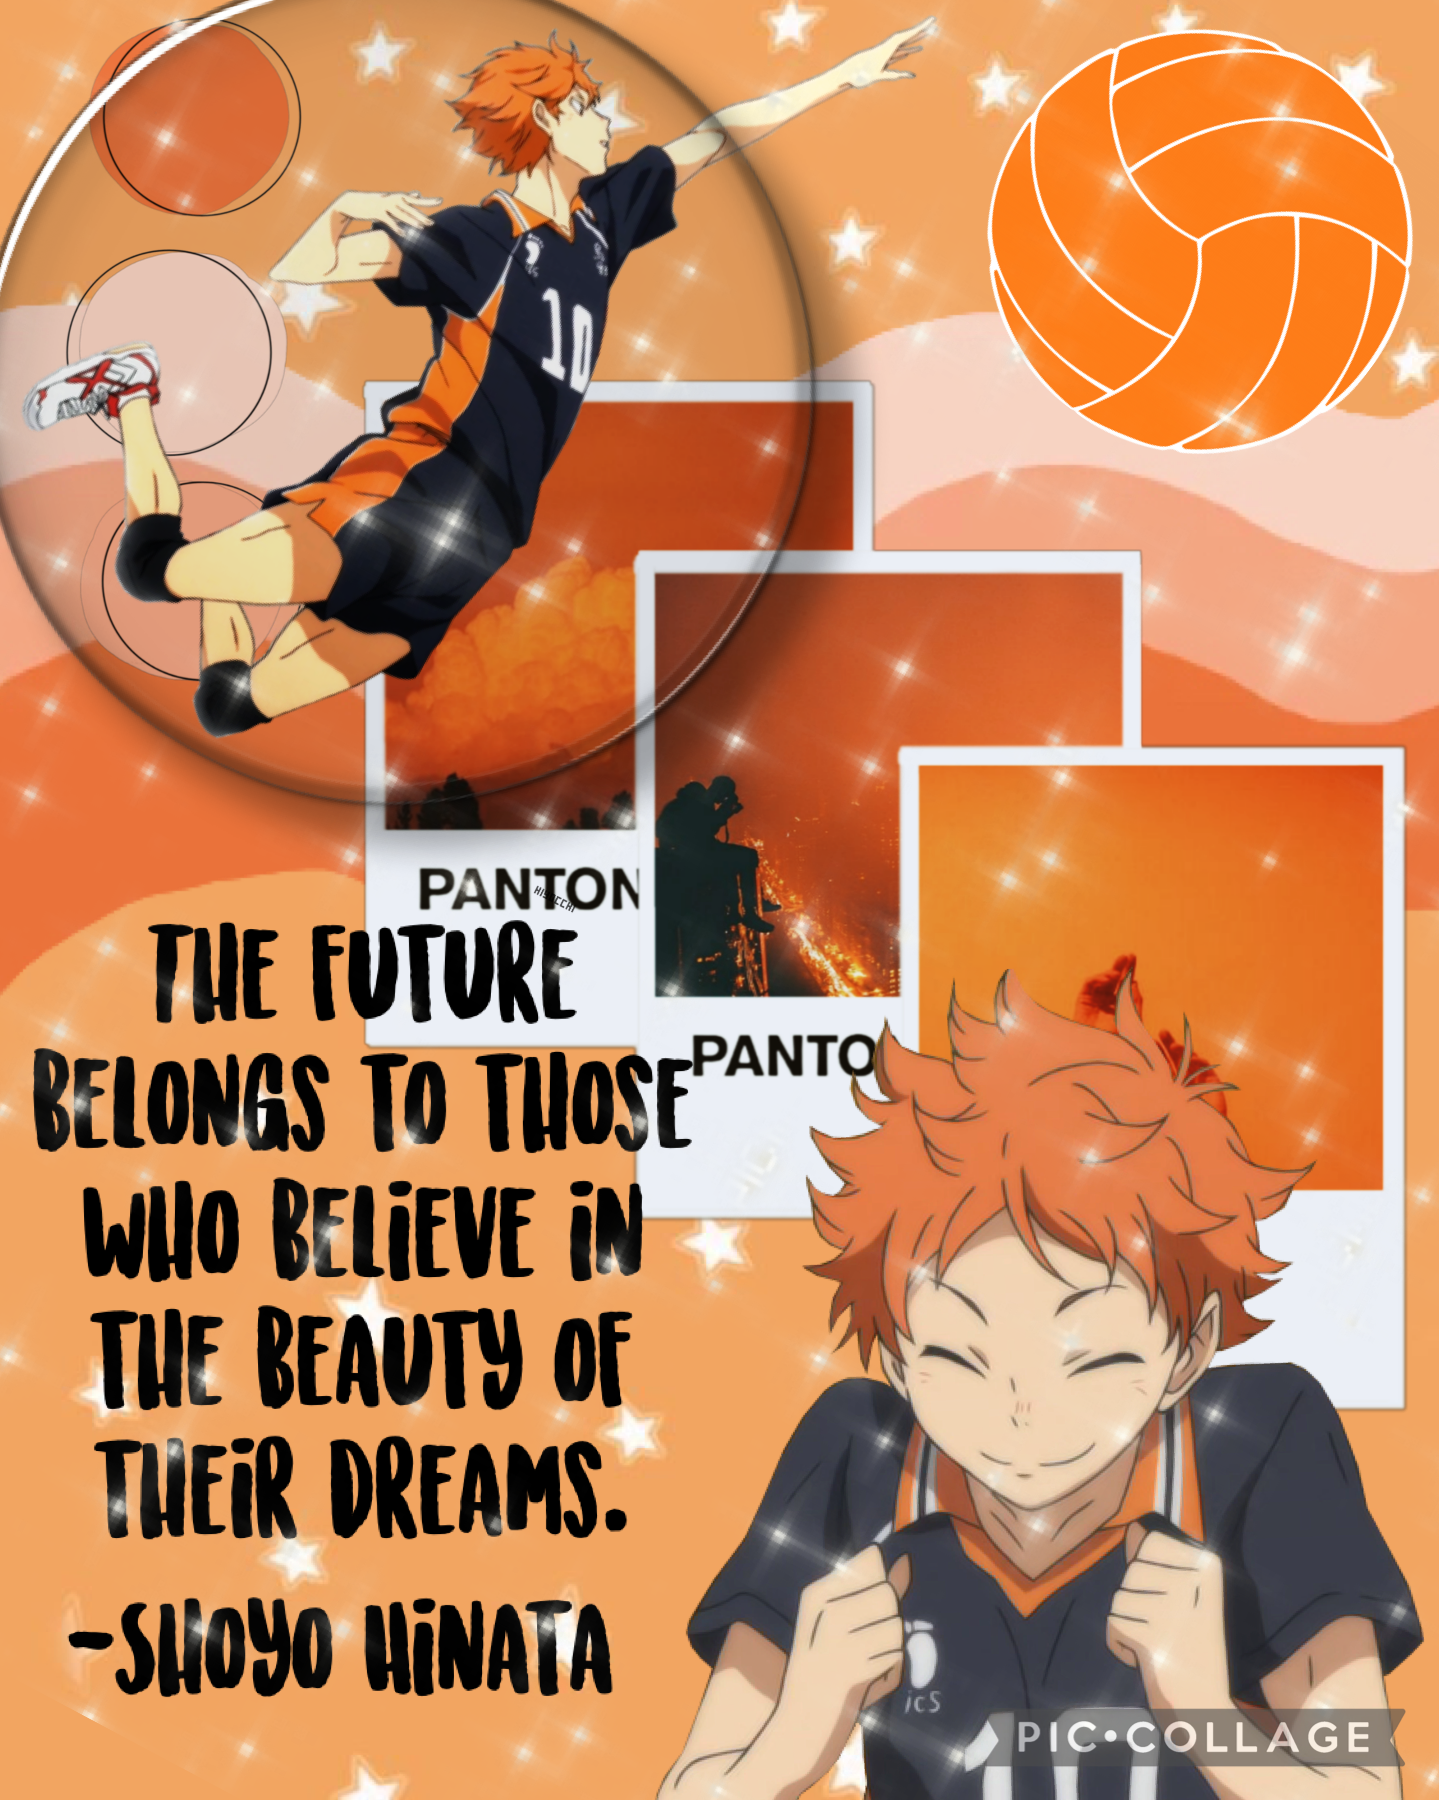 Haikyu collage! Next collage I’ll do is Ray from The Promised Neverland :) ❤️ 🍋 